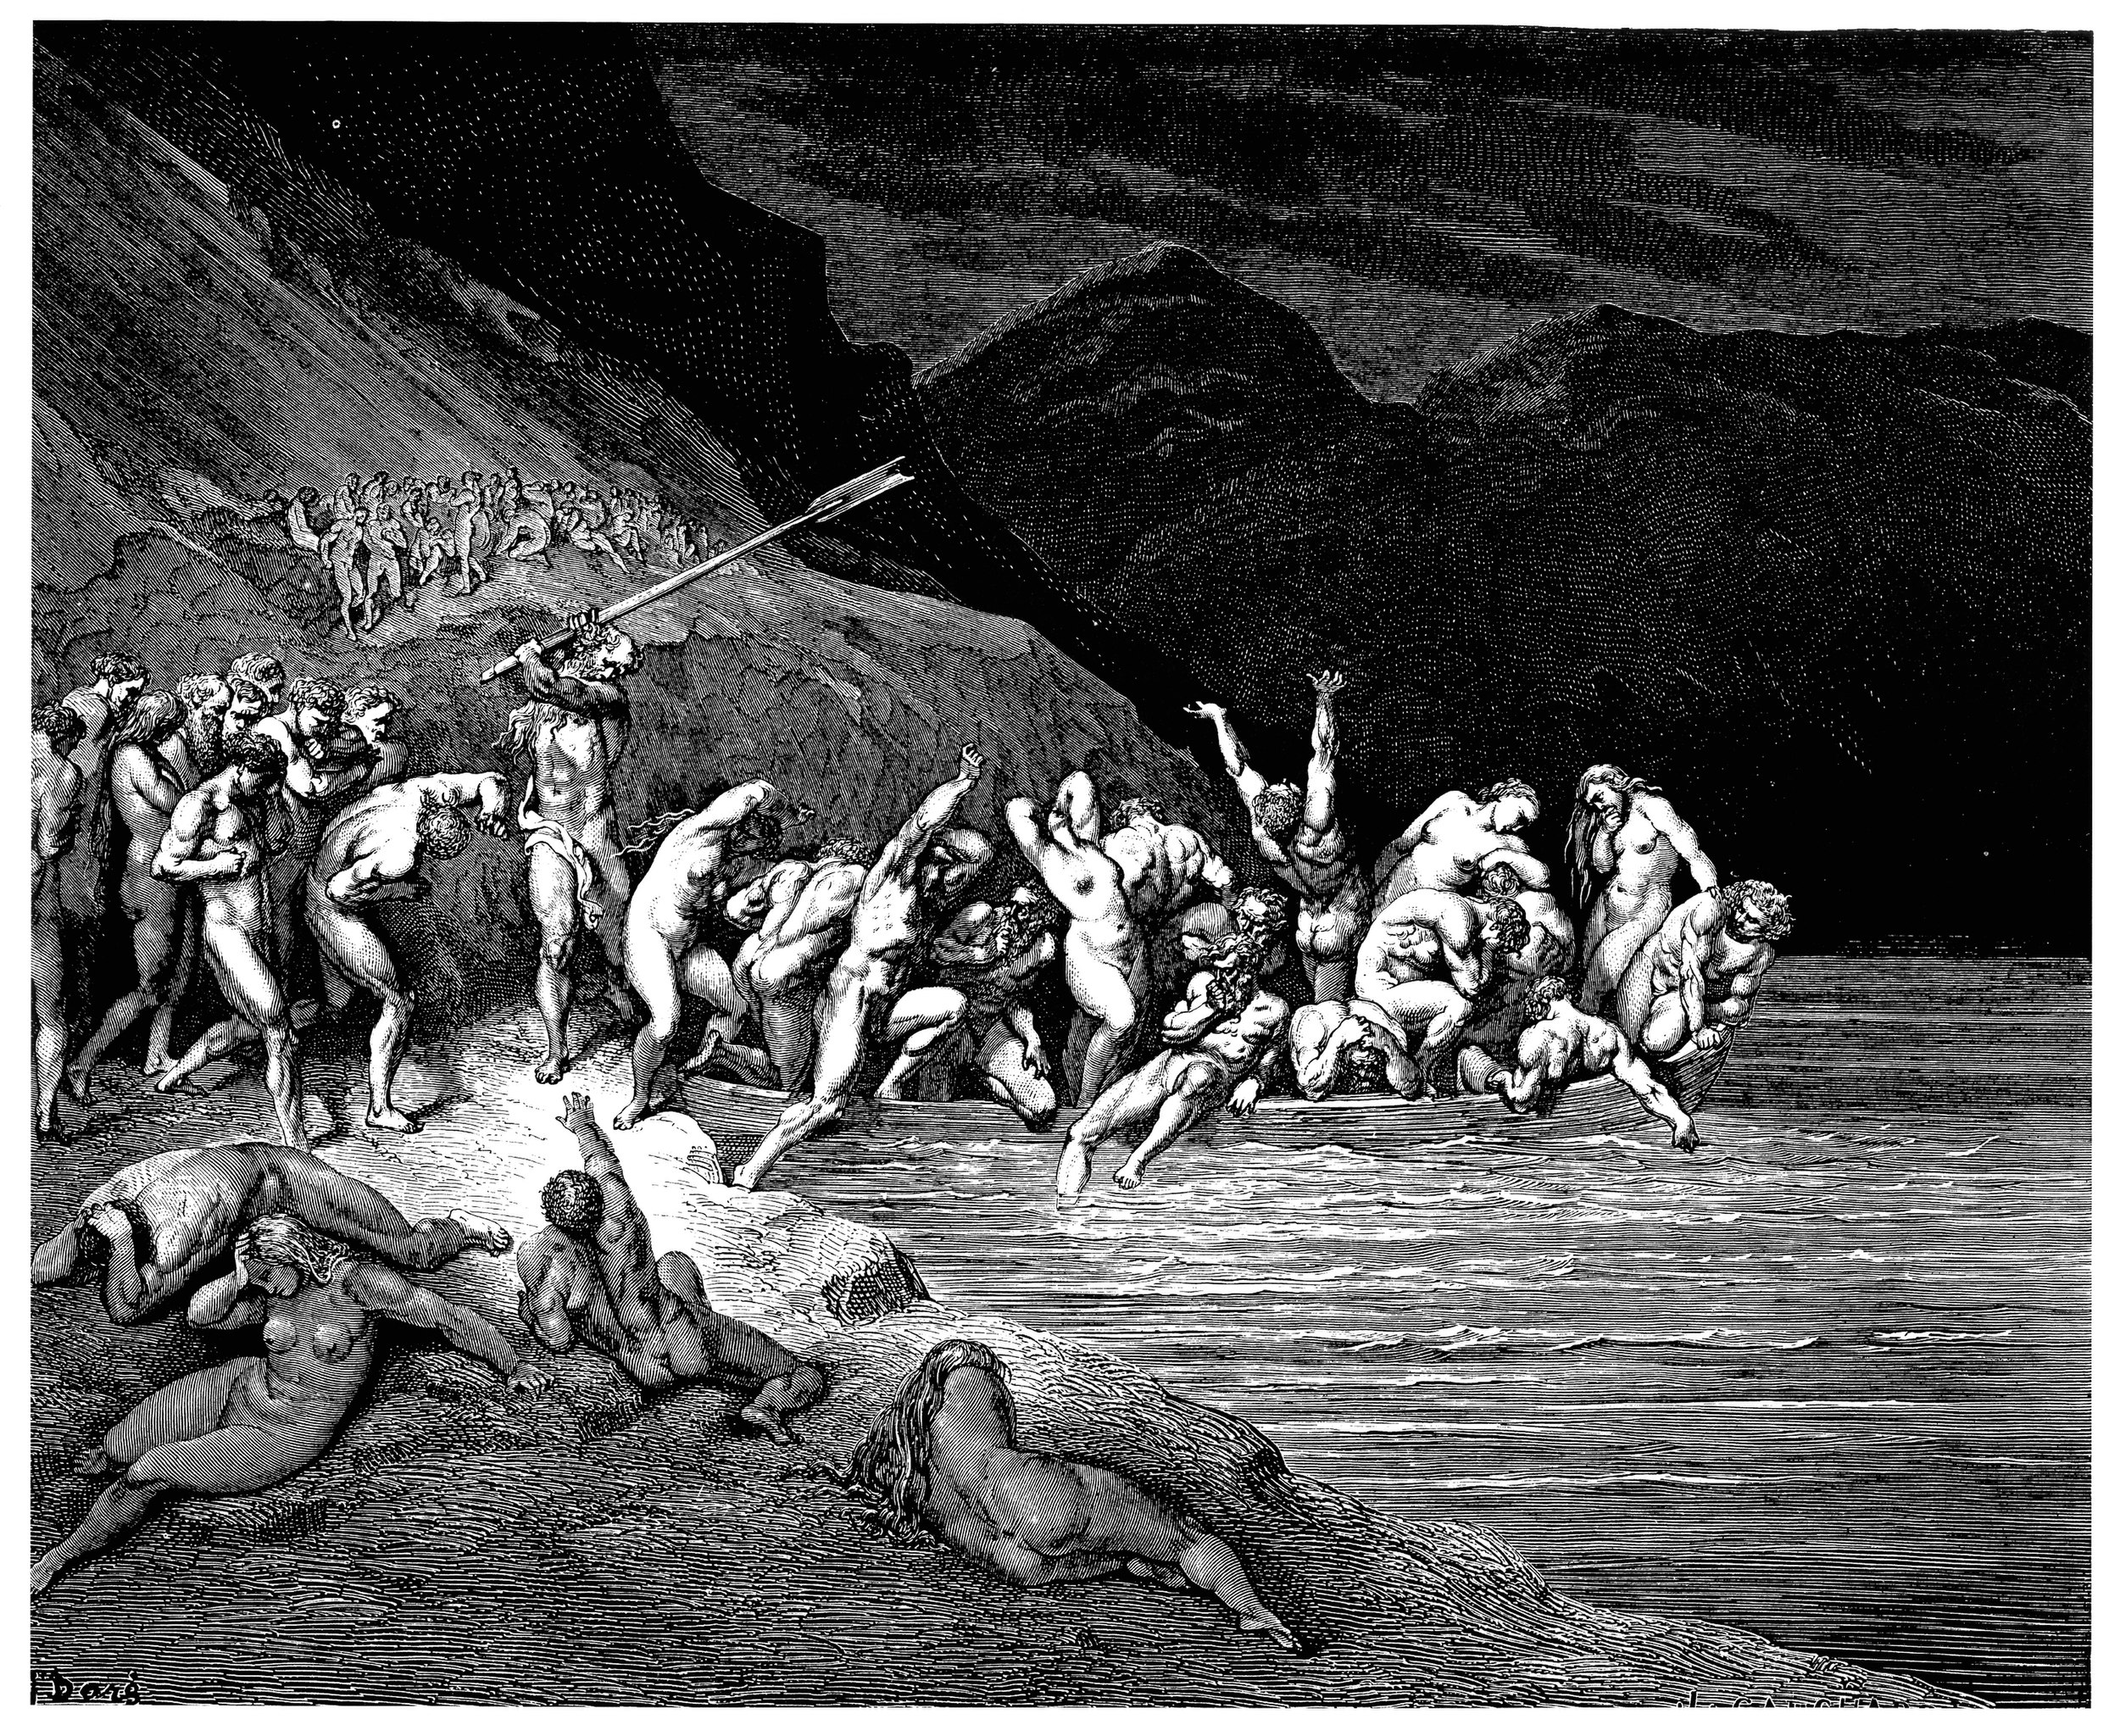 File:Gustave Doré - Dante Alighieri - Inferno - Plate 10 (Canto III -  Charon herds the sinners onto his boat).jpg - Wikipedia